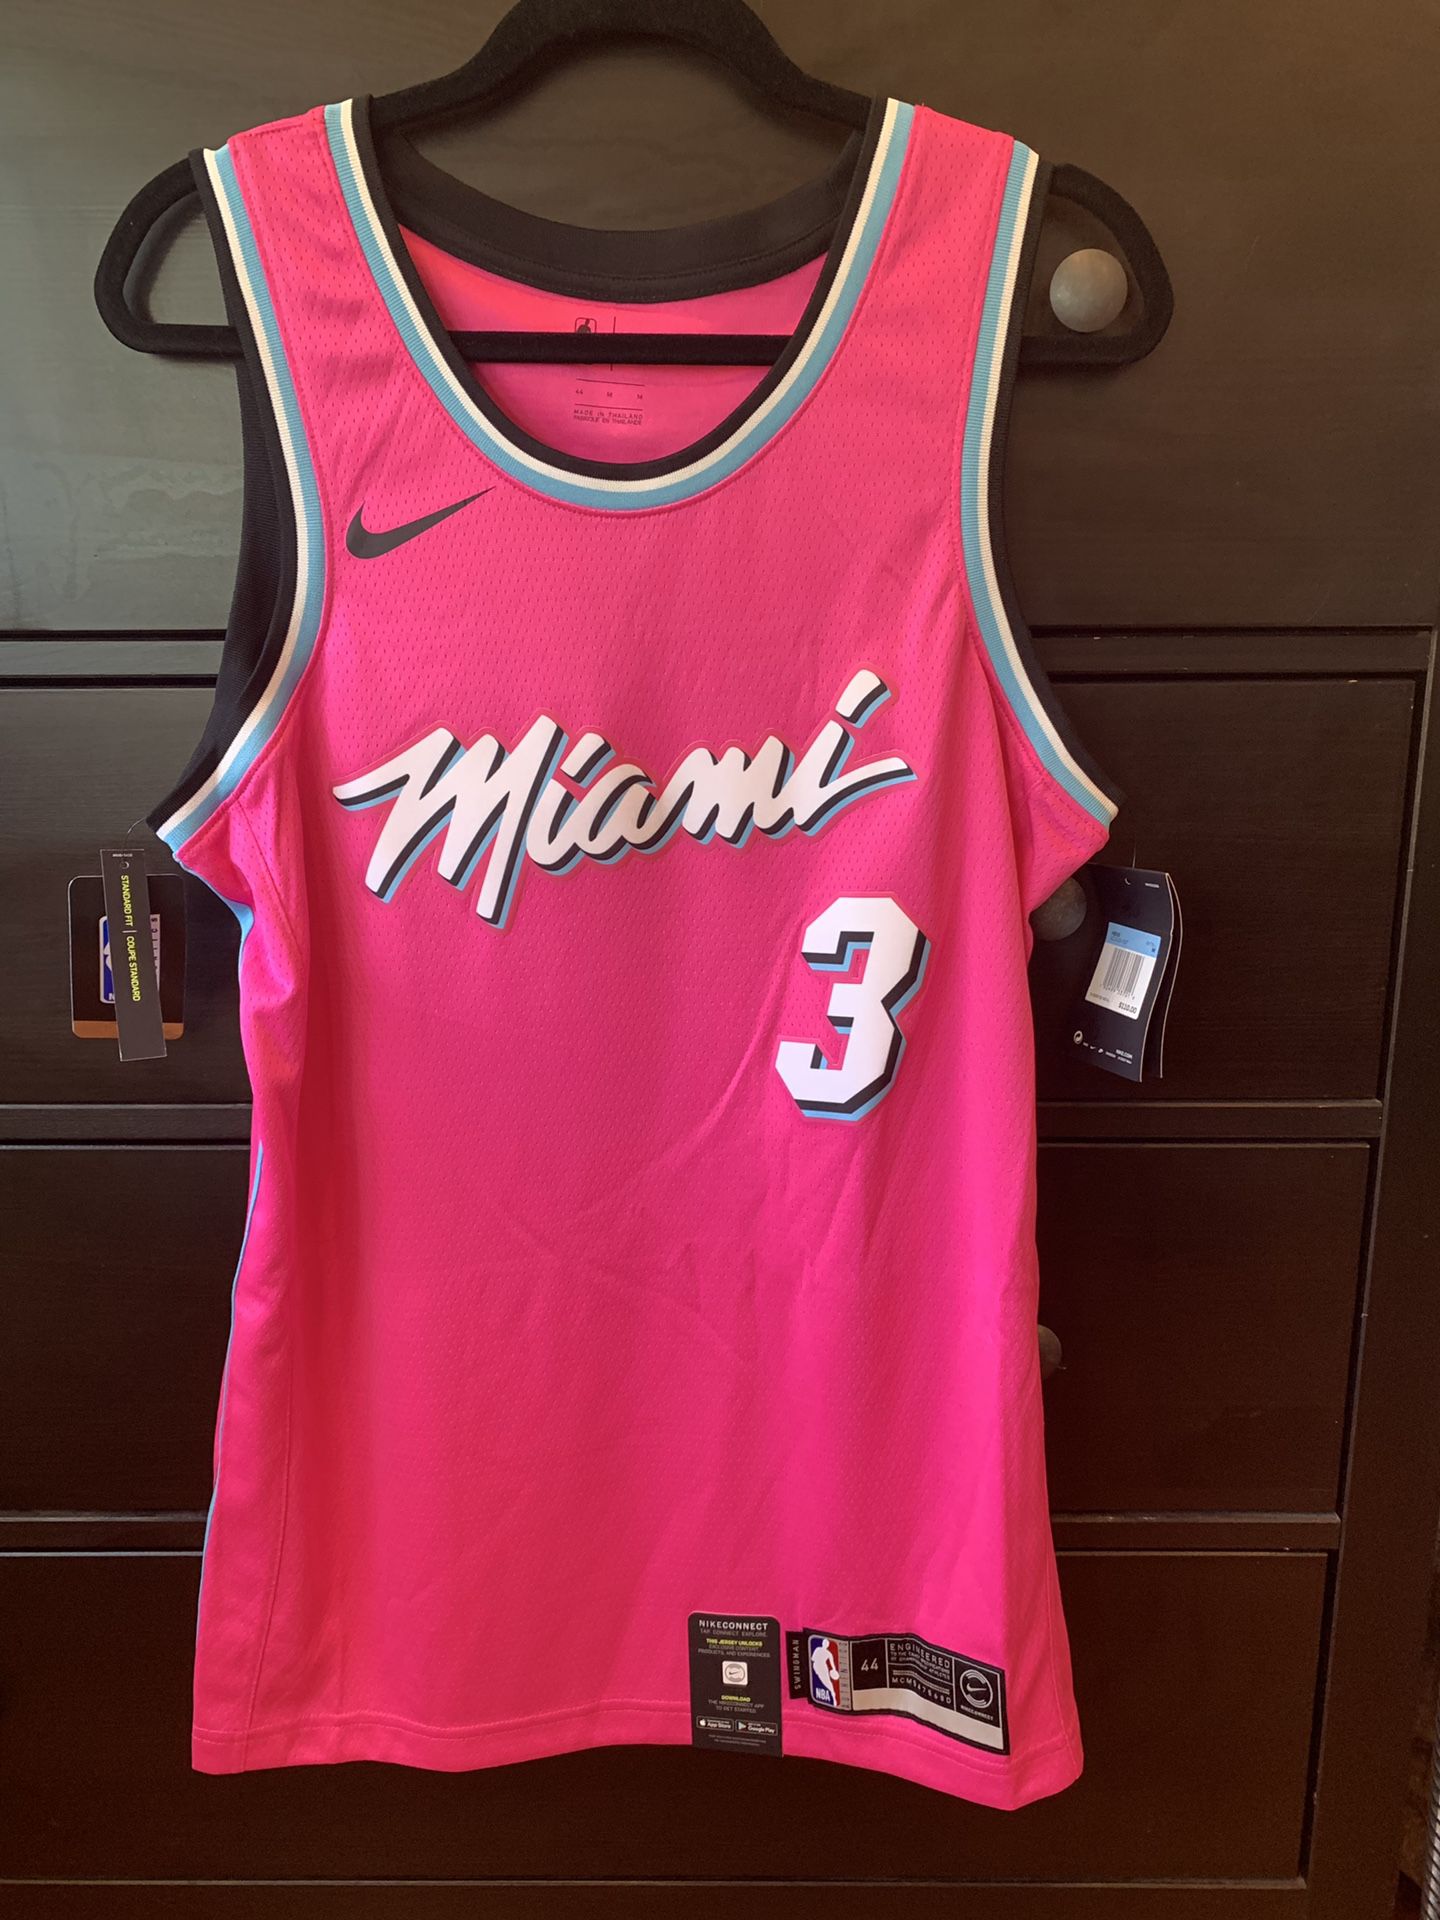 JOTD brought out the “heat” for game 4. D wade pink vice earned